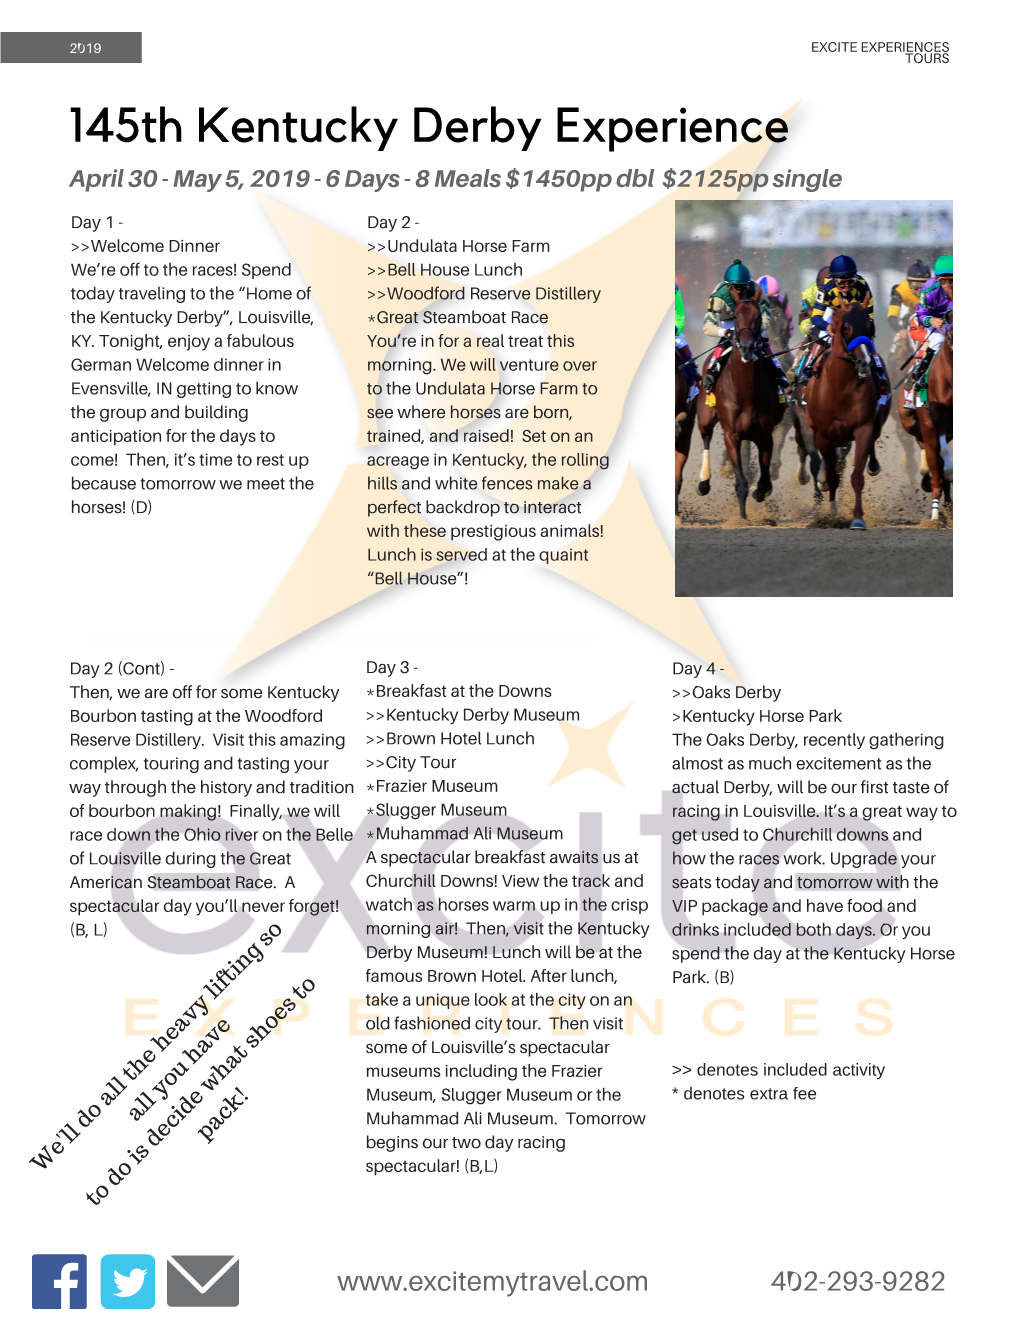 Kentucky Derby Experience April 30 - May 5, 2019 - 6 Days - 8 Meals $1450Pp Dbl $2125Pp Single